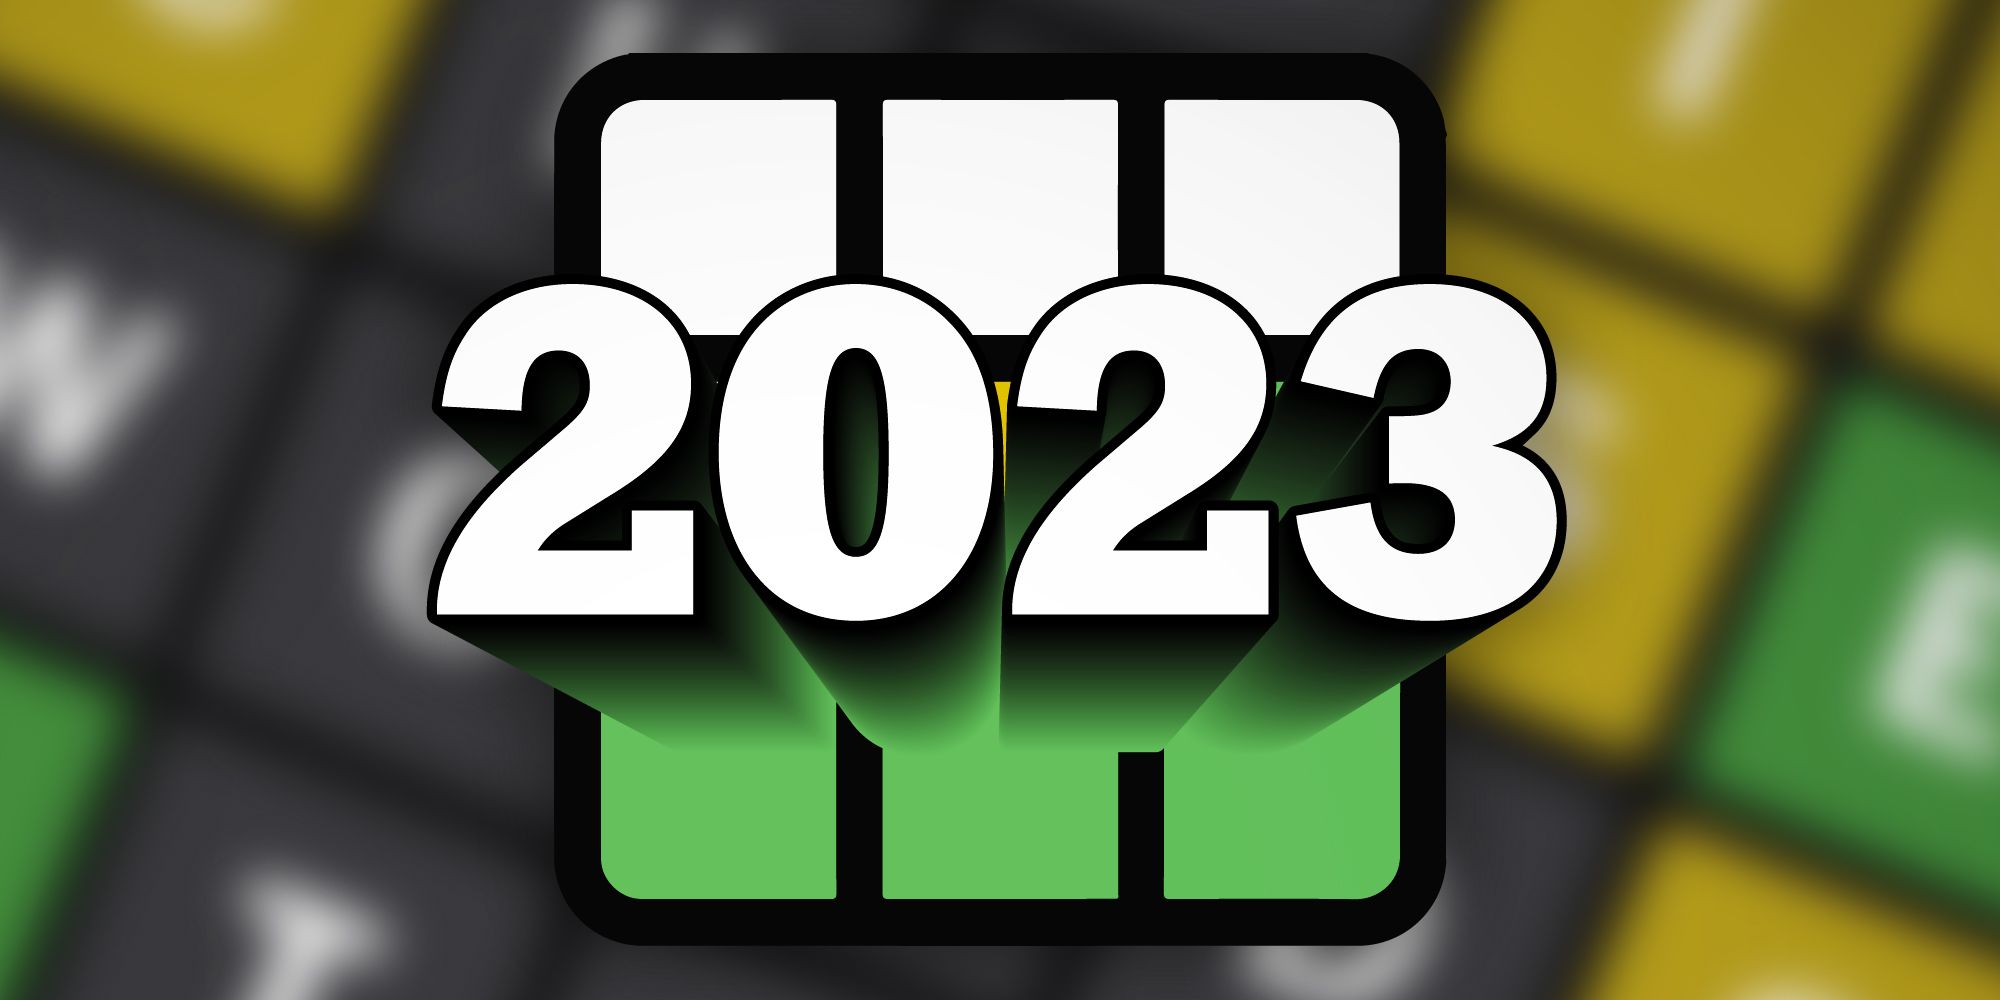 The word "2023" in big letters with wordle-like boxes in the background